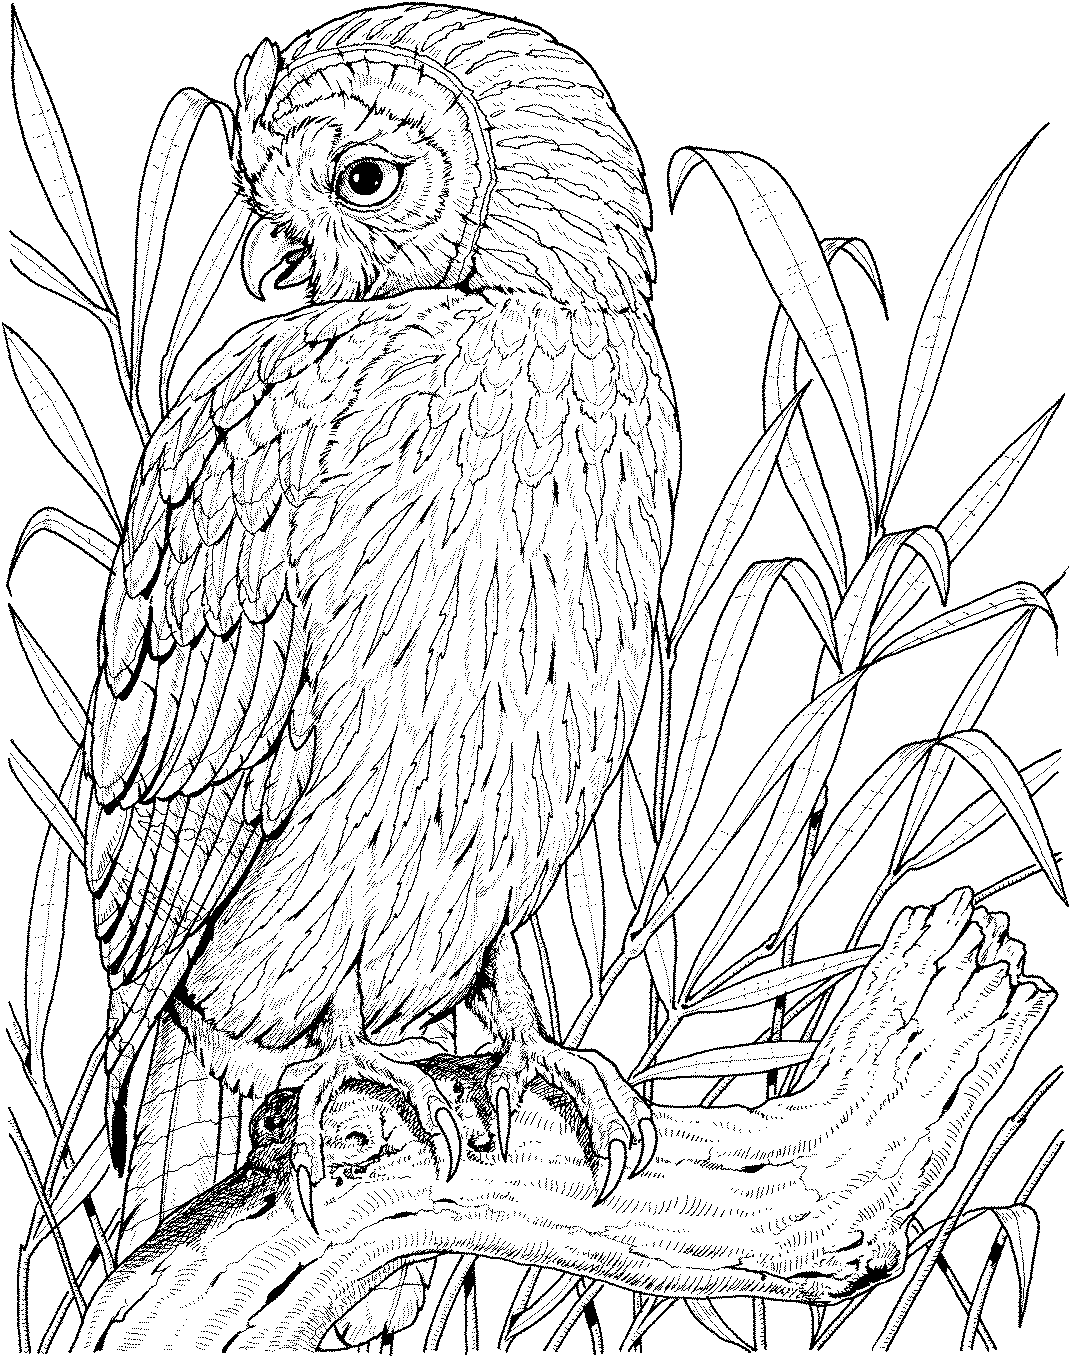 Owl Coloring Pages | Owl Coloring Pages